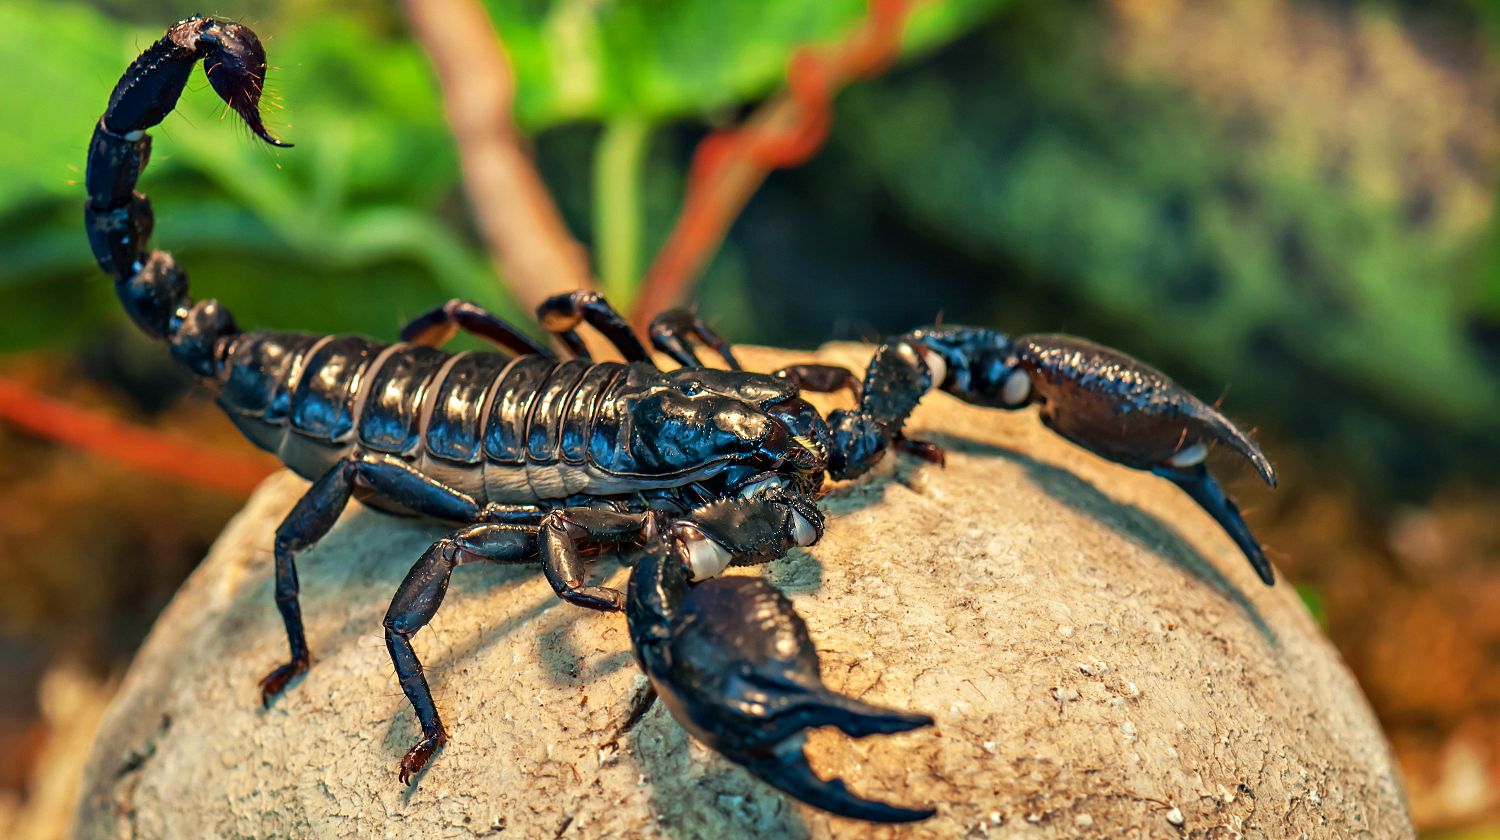 Featured | Black scorpion emperor scorpion | How To Get Rid Of Scorpions | Ways To Keep Scorpions At Bay